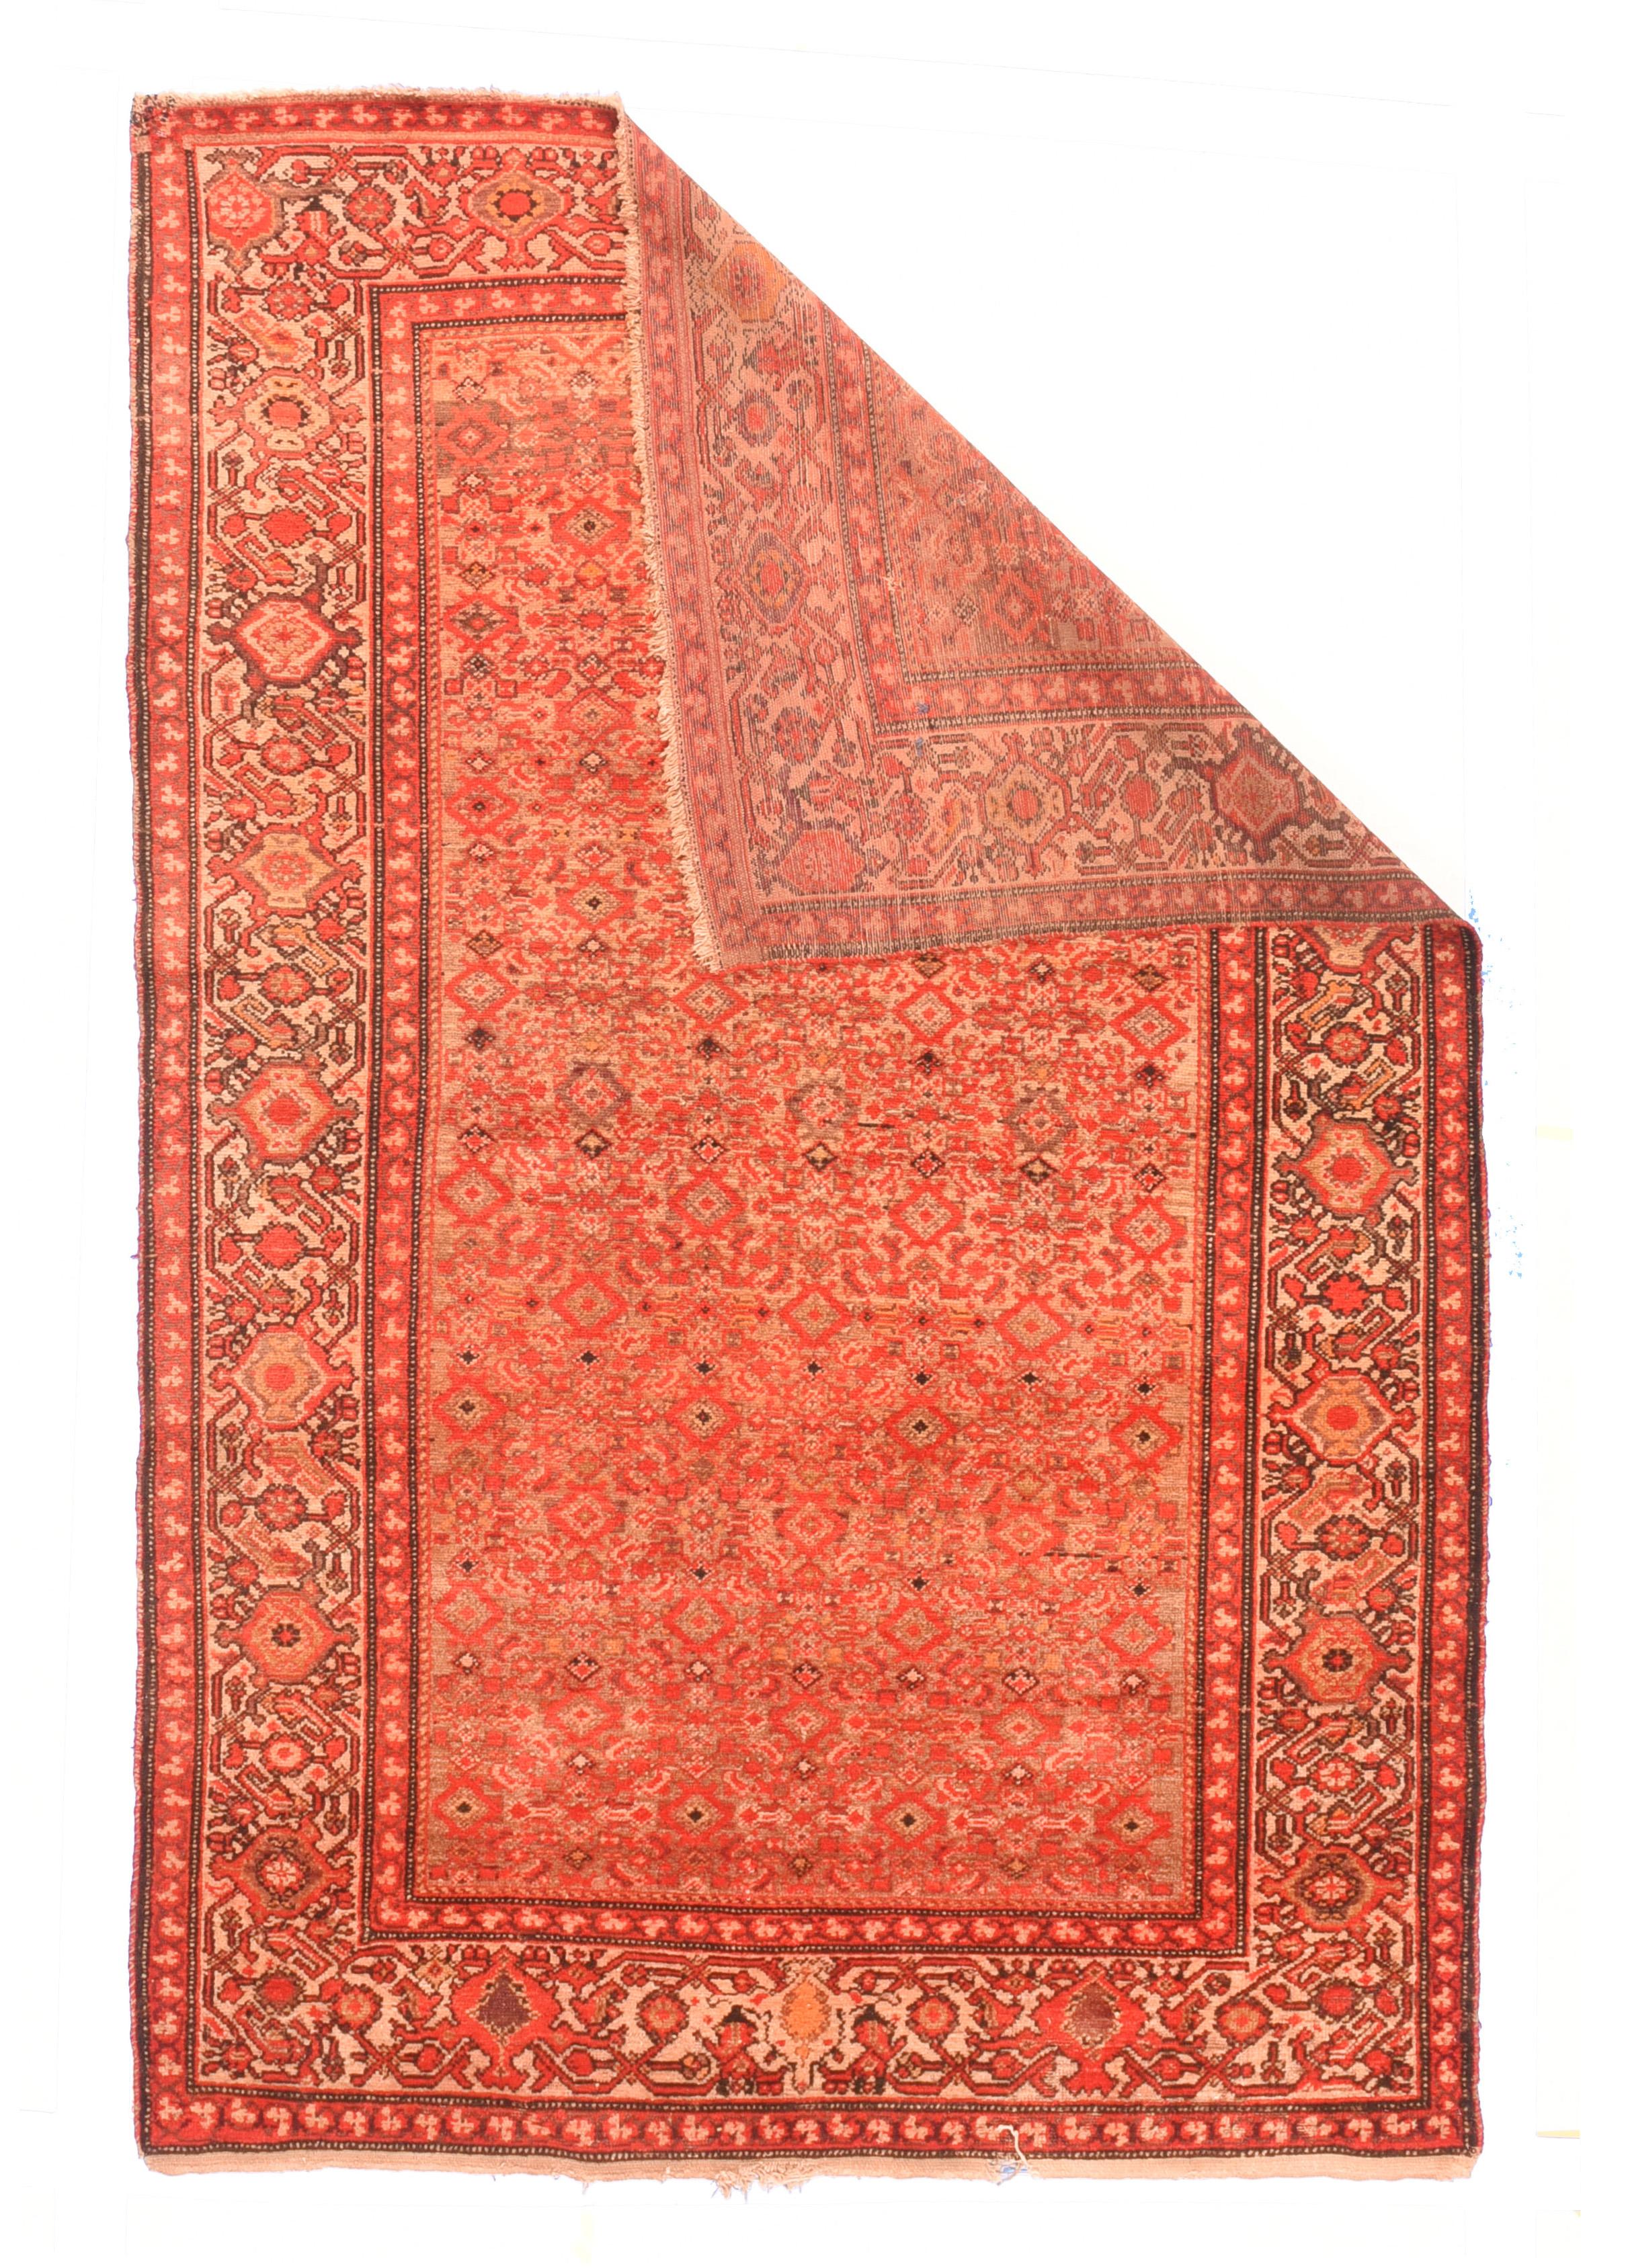 Antique Malayer Rug 4'4'' x 6'6''. This short-pile west Persian town scatter with a cotton foundation, single weft, and symmetric knots shows a distinctly abrashed beige field well-covered by a small allover Herati lancet leaf, open diamond and